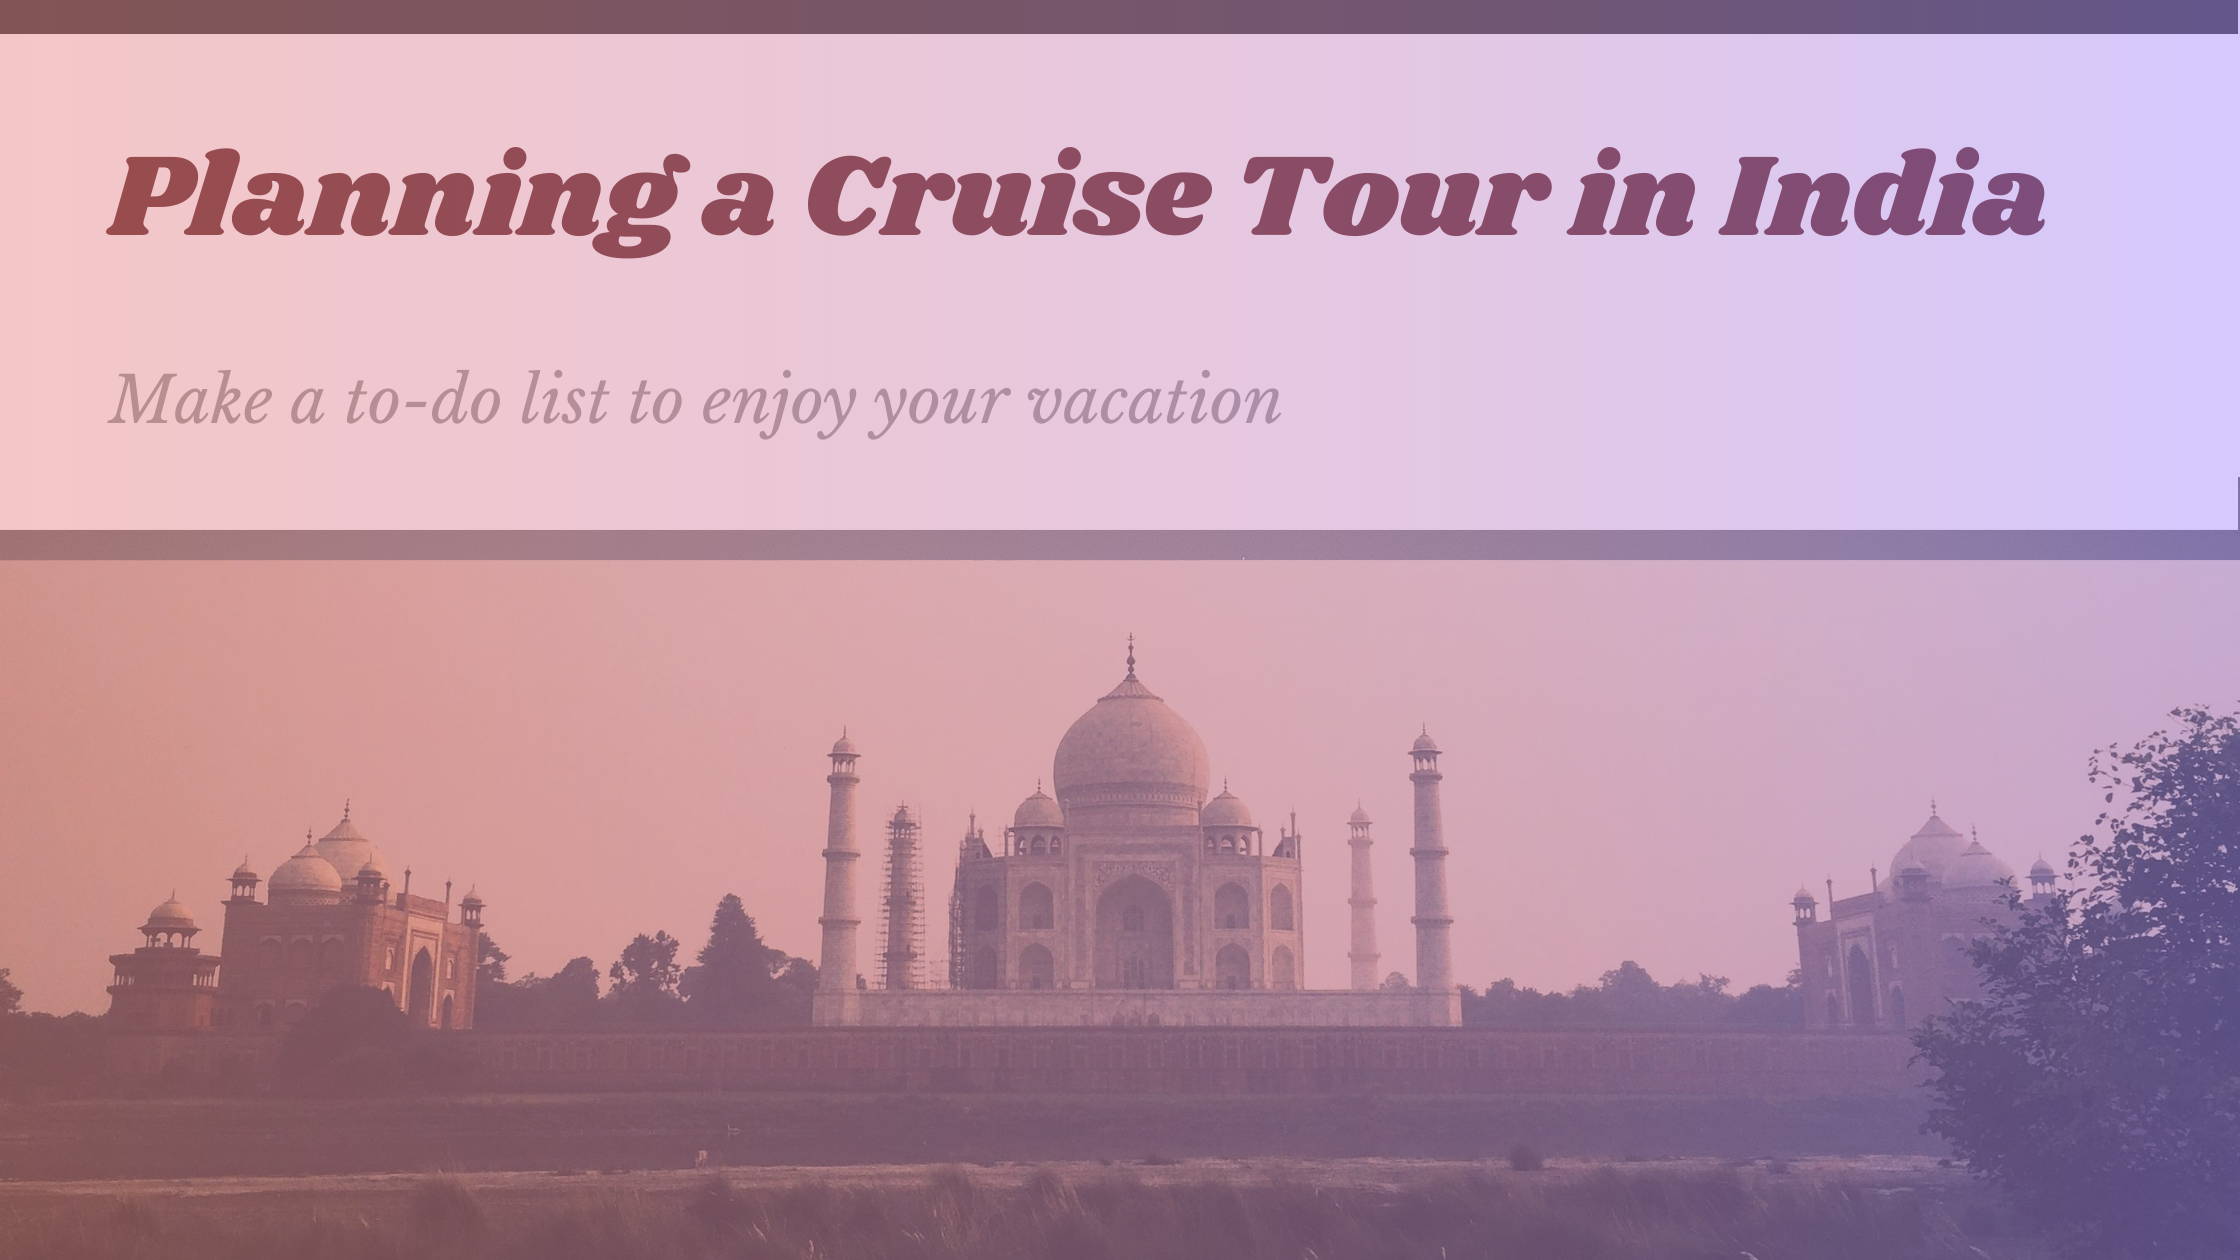 Tips to Keep in Memory While Preparing a Cruise Tour in India